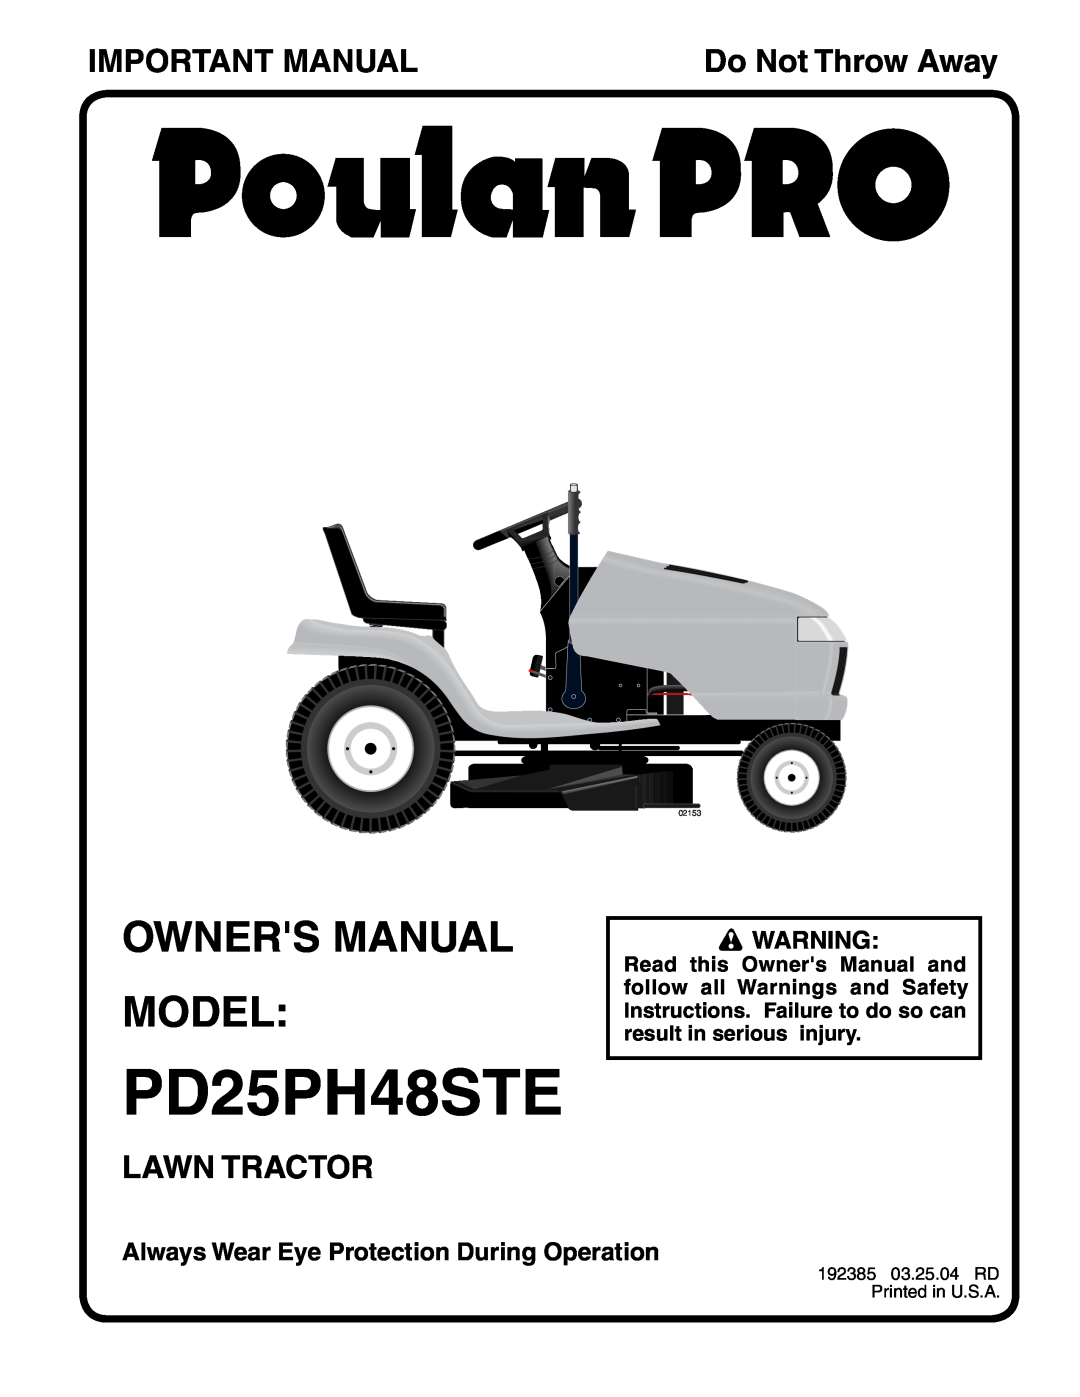 Poulan PD25PH48STE owner manual Owners Manual Model, Important Manual, Lawn Tractor, Do Not Throw Away, 02153 